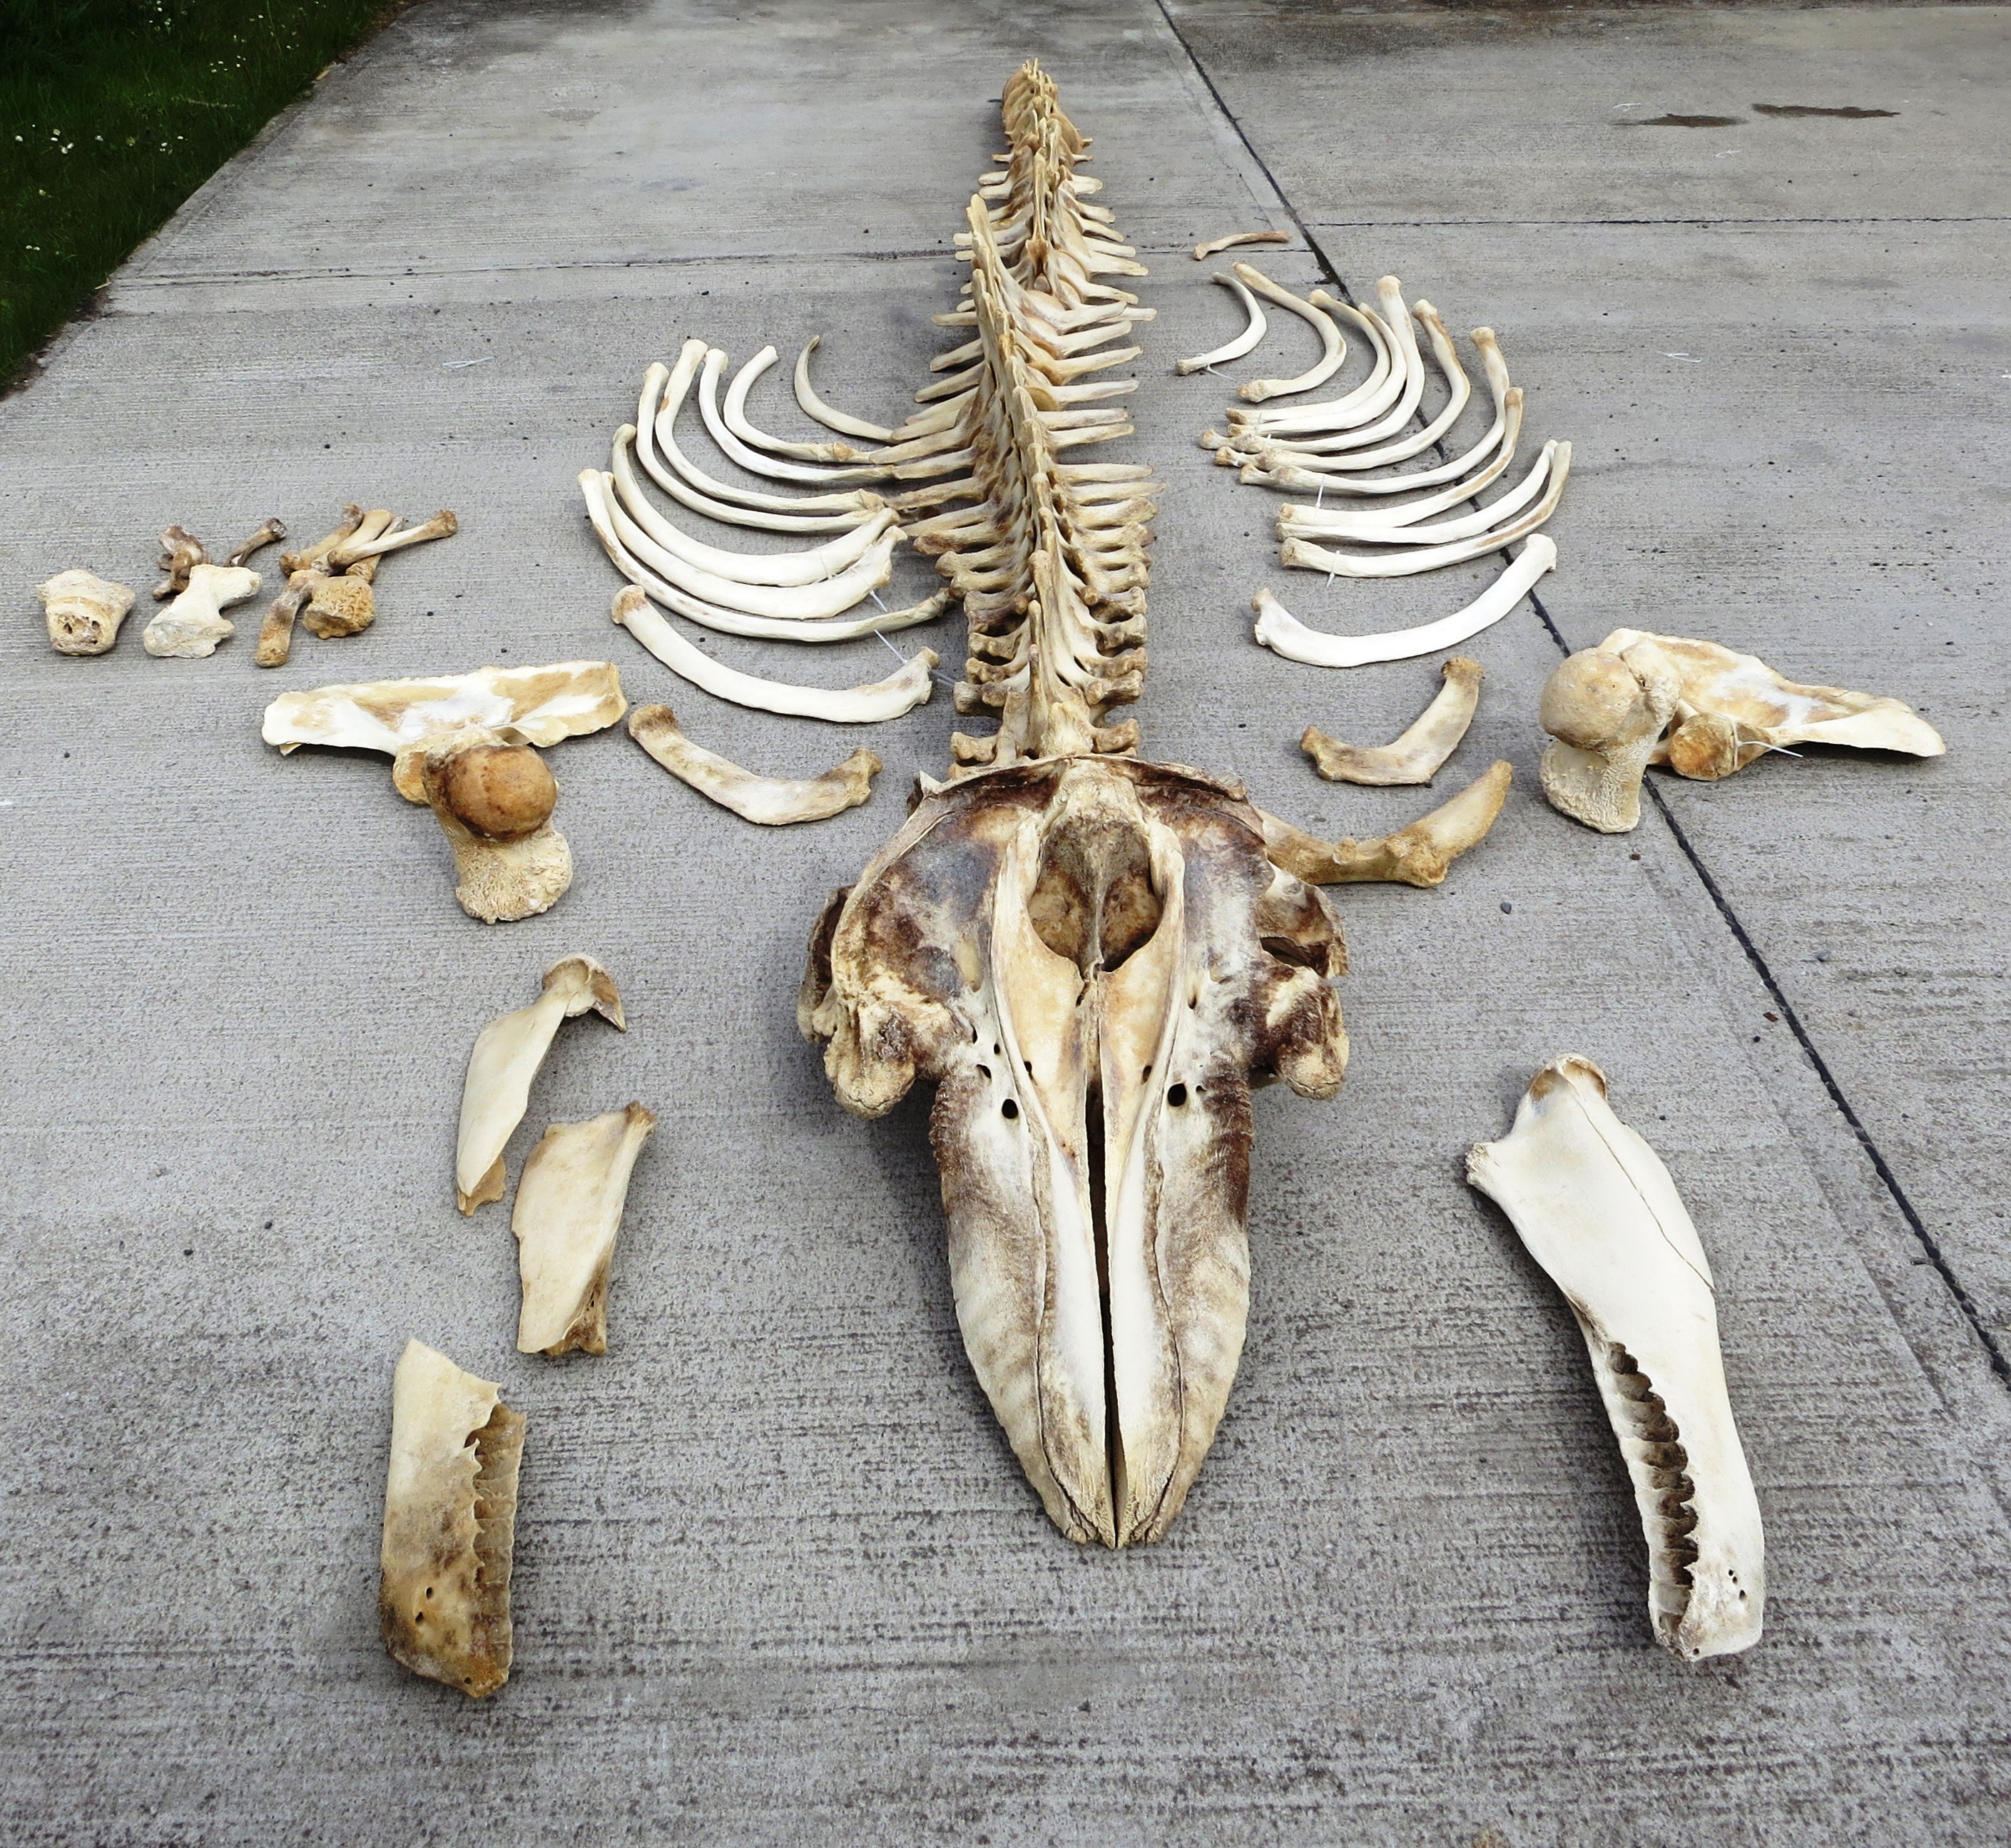 Above: Skeleton of a wild Killer whale stranded in the Western Isles, Scotland, and now in the collections of the National Museums Scotland.